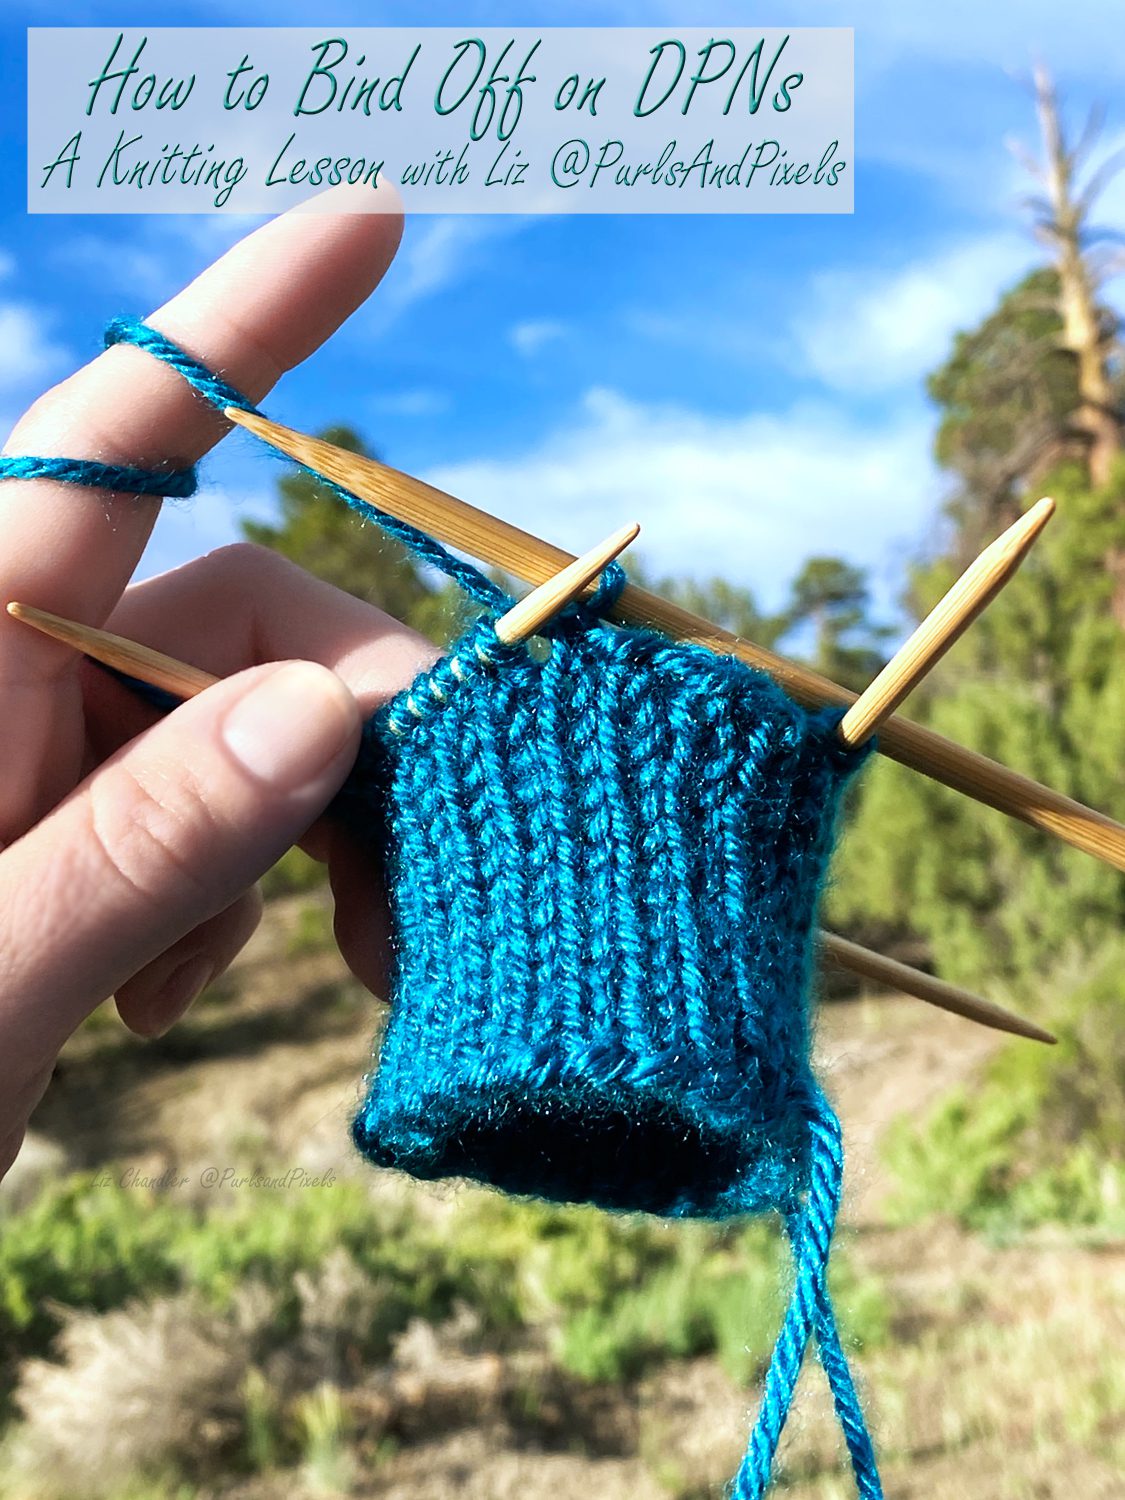 Bind Off on Double Point Needles (DPNs)